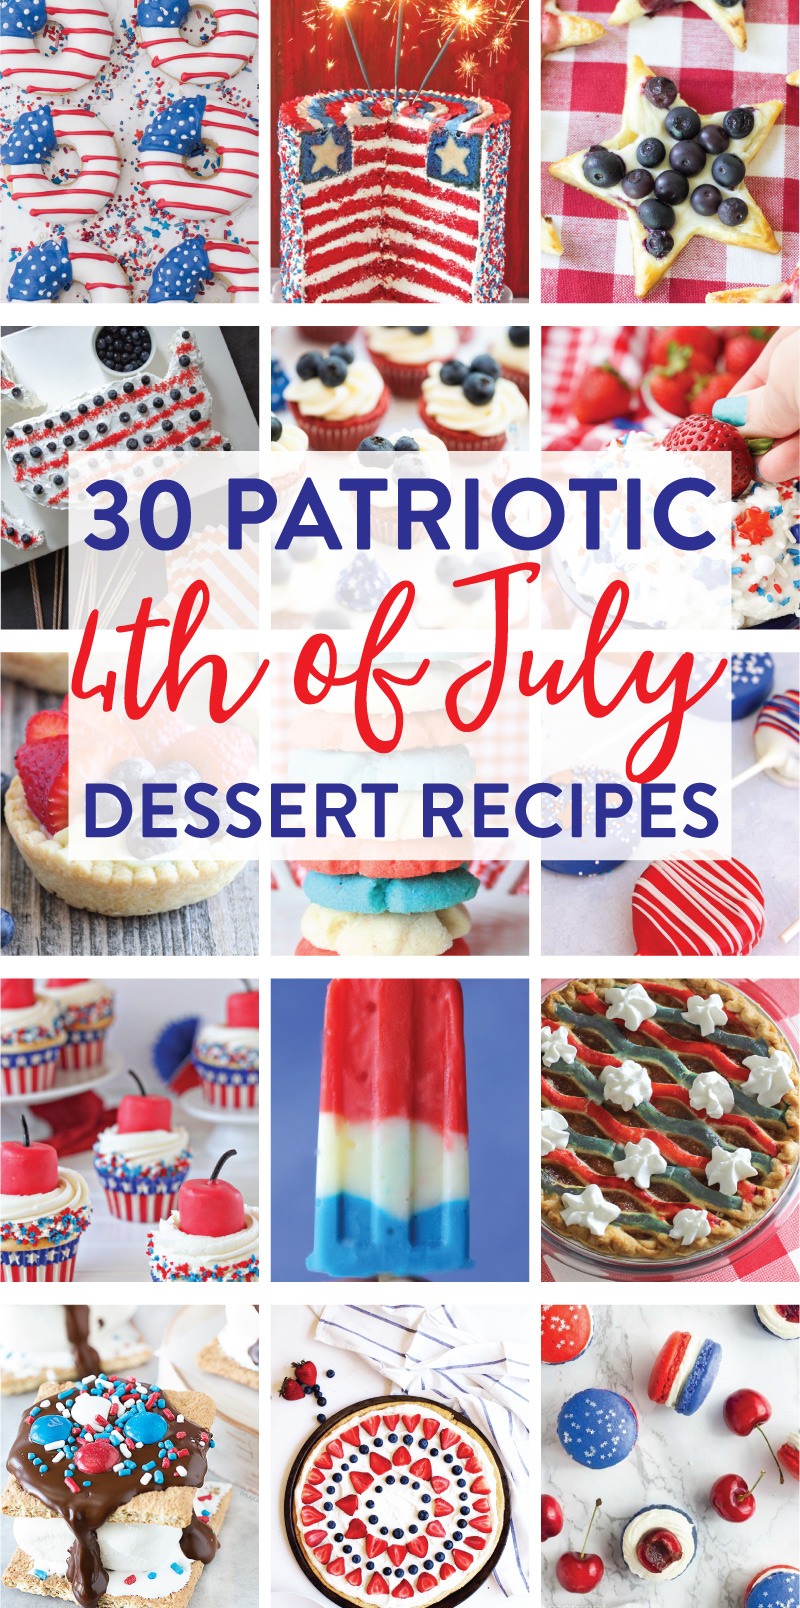 30 Red, White, and Blue 4th of July Dessert Recipes on Love the Day